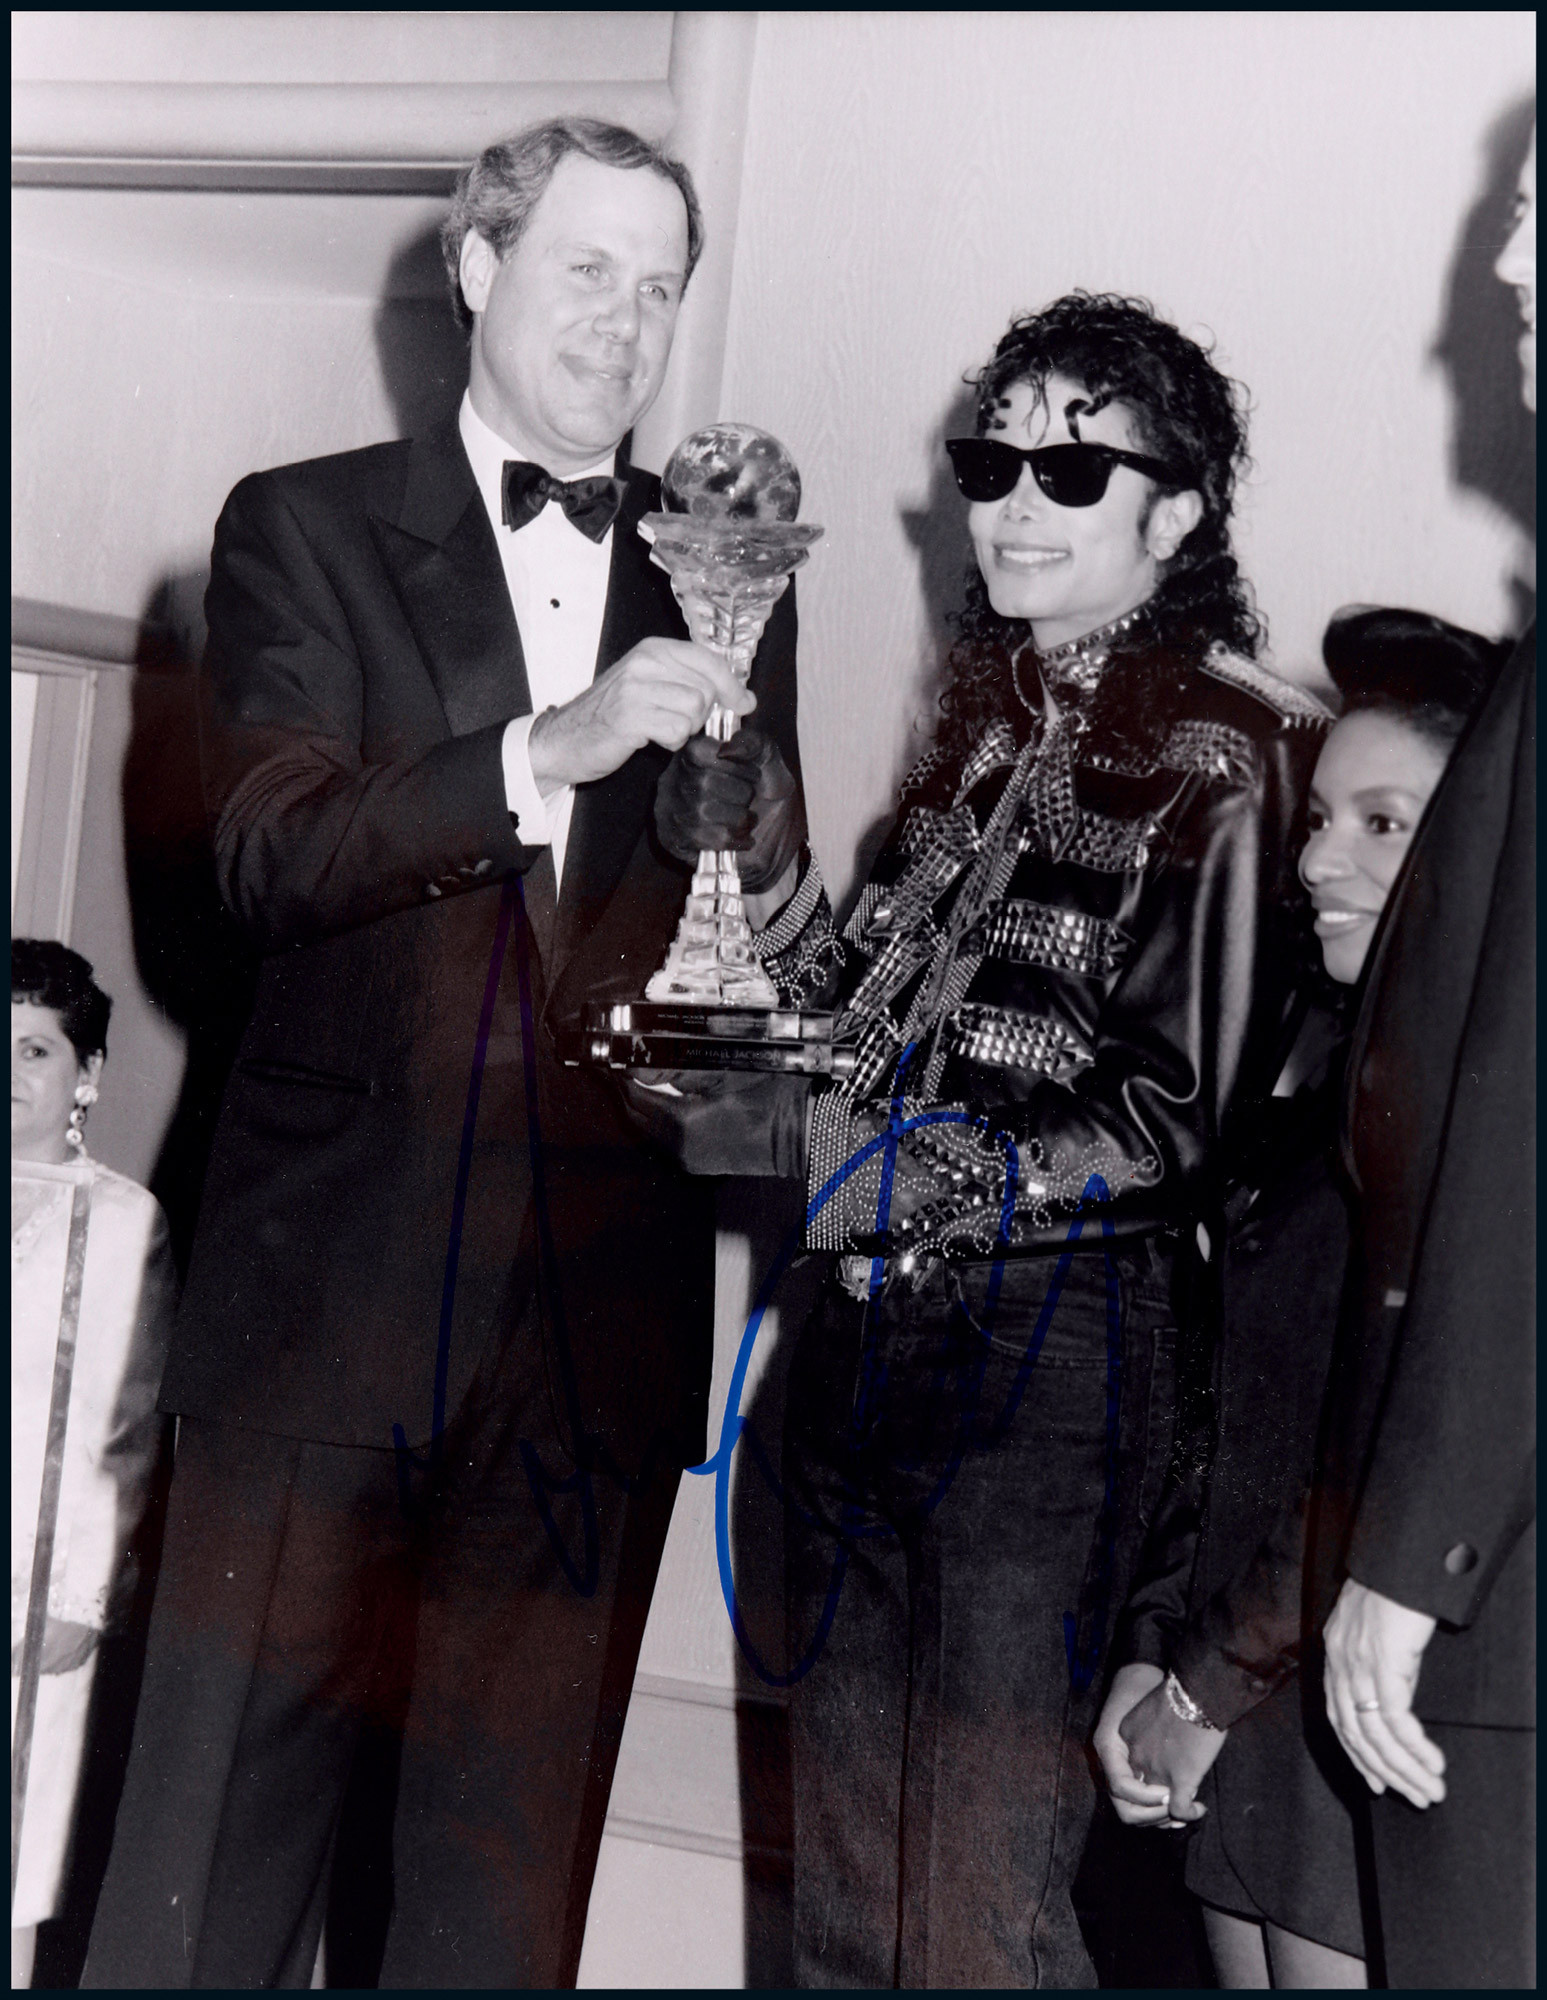 The autographed photograph of Michael Jackson, “the king of American Music”, with certificate